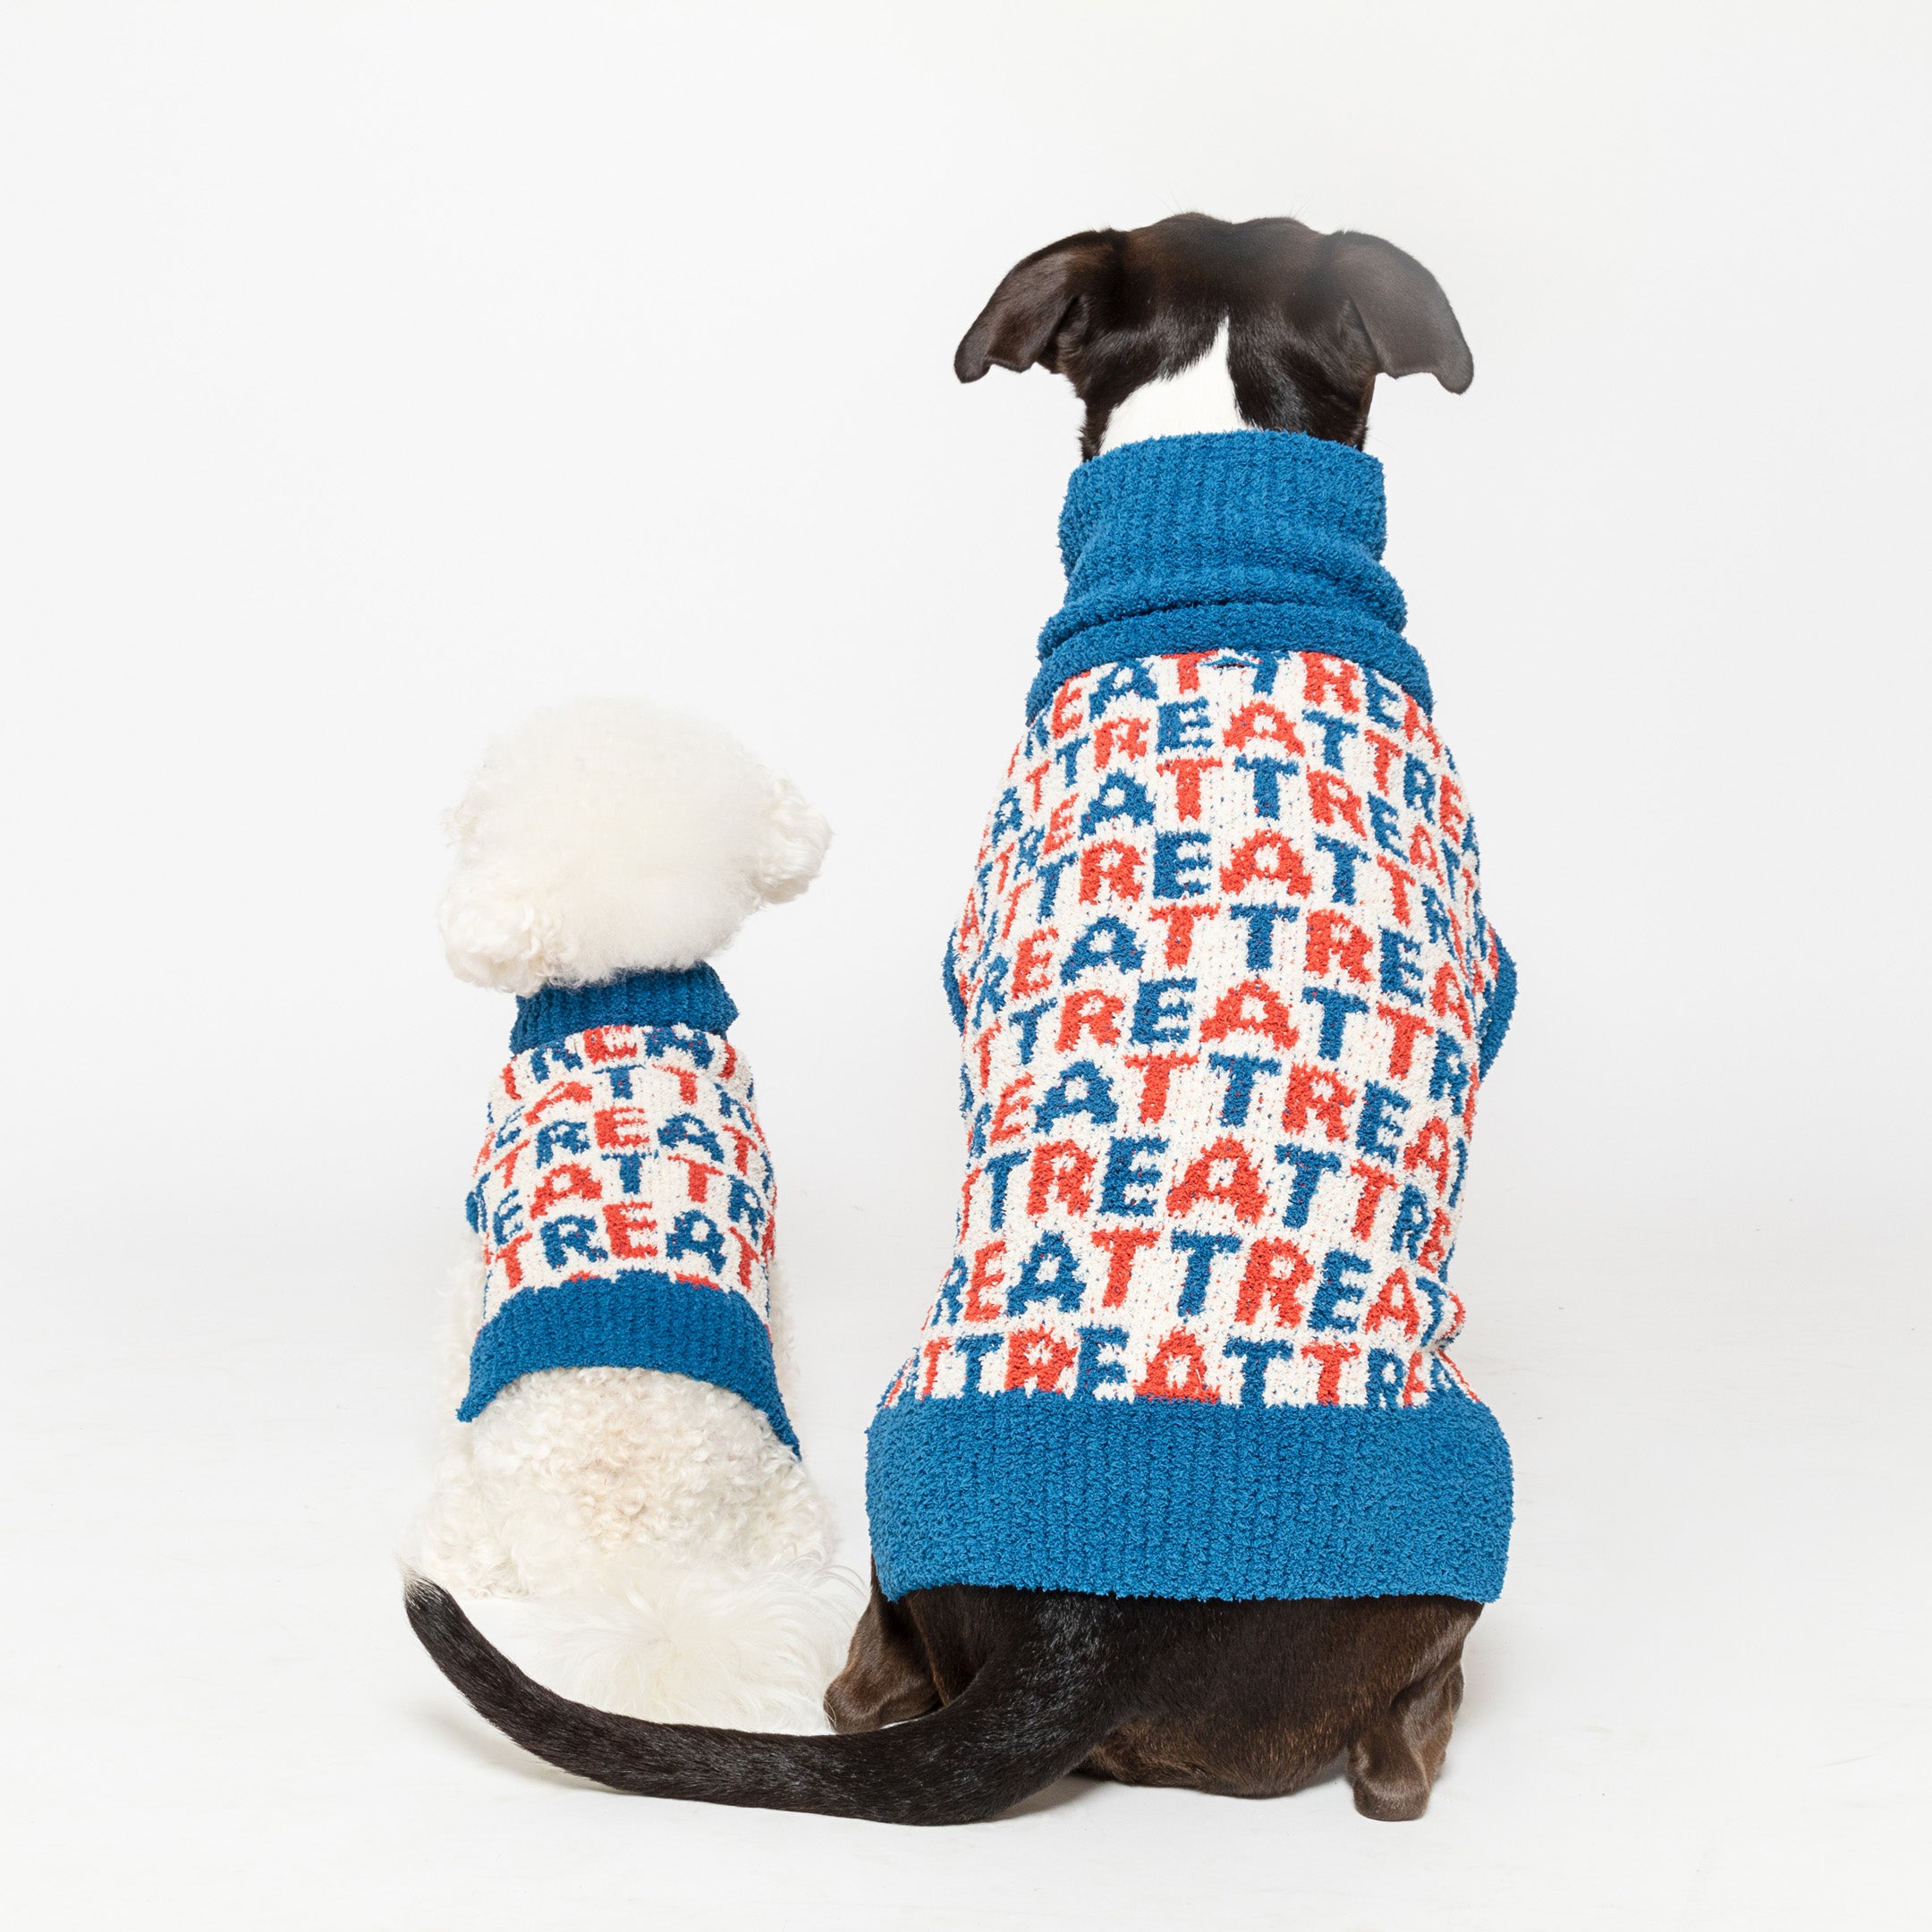 Two dogs from behind, one small and fluffy, the other larger with a darker coat, both sporting cozy blue sweaters adorned with a "Treat" motif.